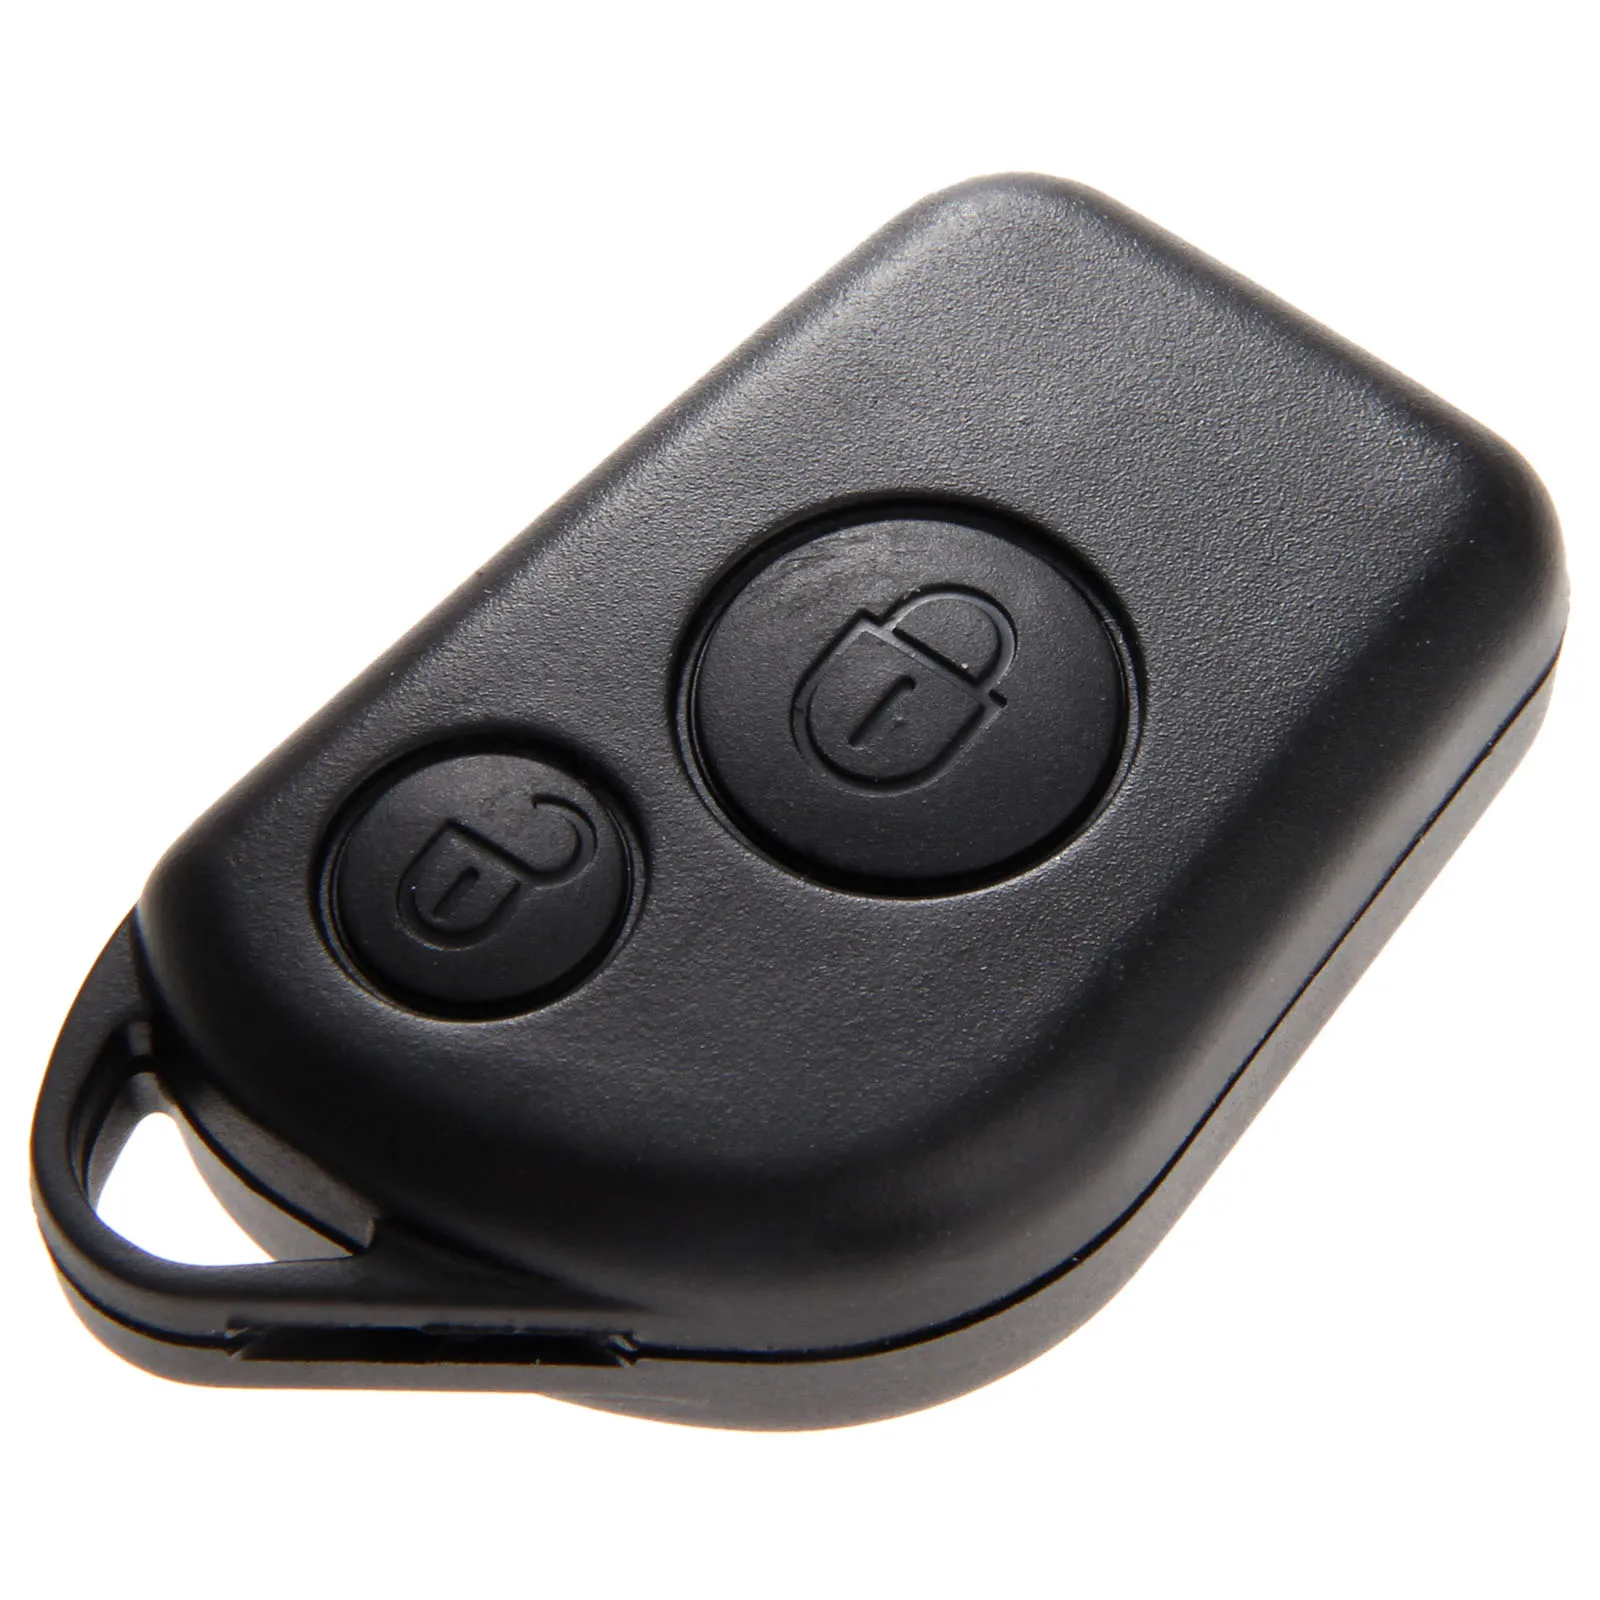 2 Buttons Remote Key Fob Case Shell Fit For Citroen Saxo Berlingo Picasso Xsara Peugeot 306 307 406 Replacement Car Covers